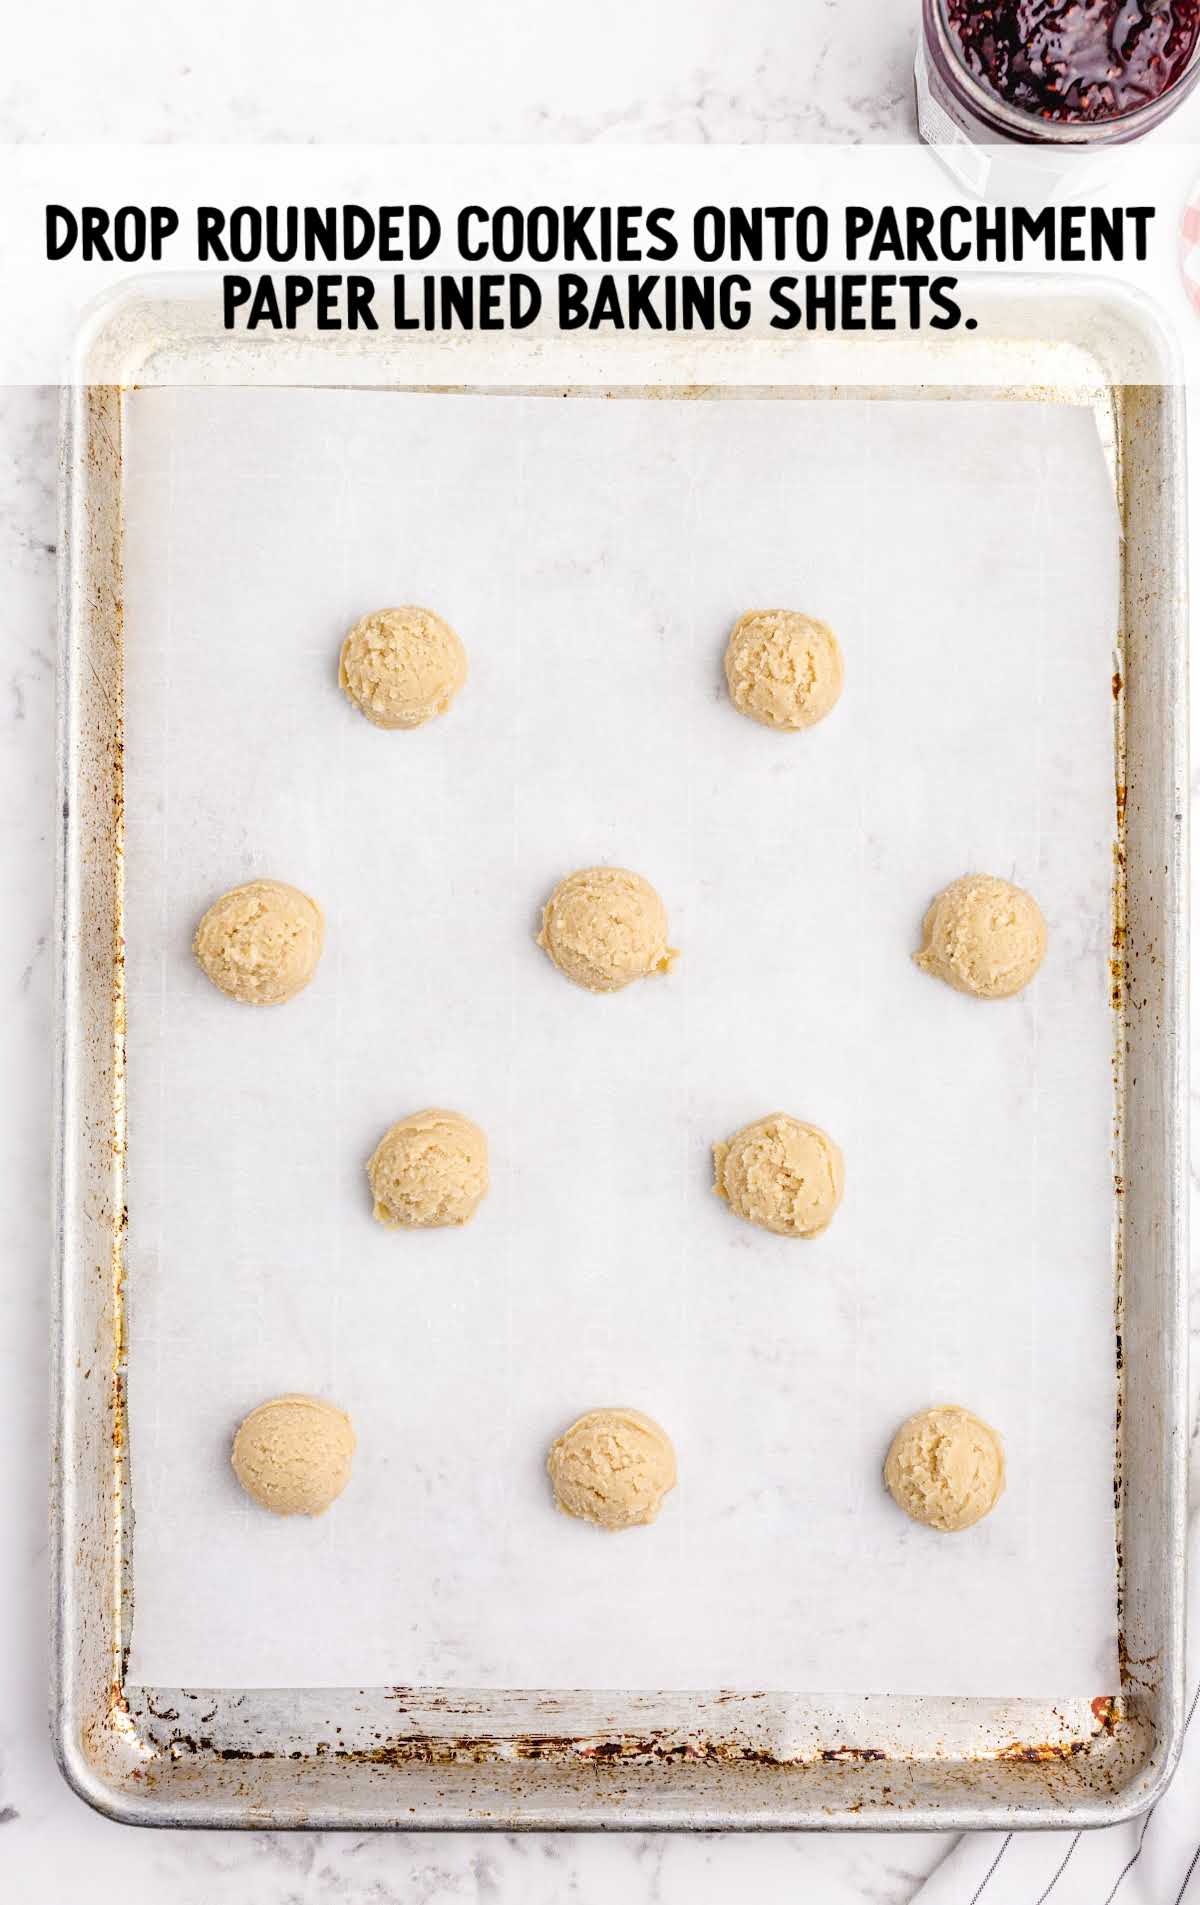 Thumbprint Cookies process shot of balls of cookie dough placed on a baking sheet